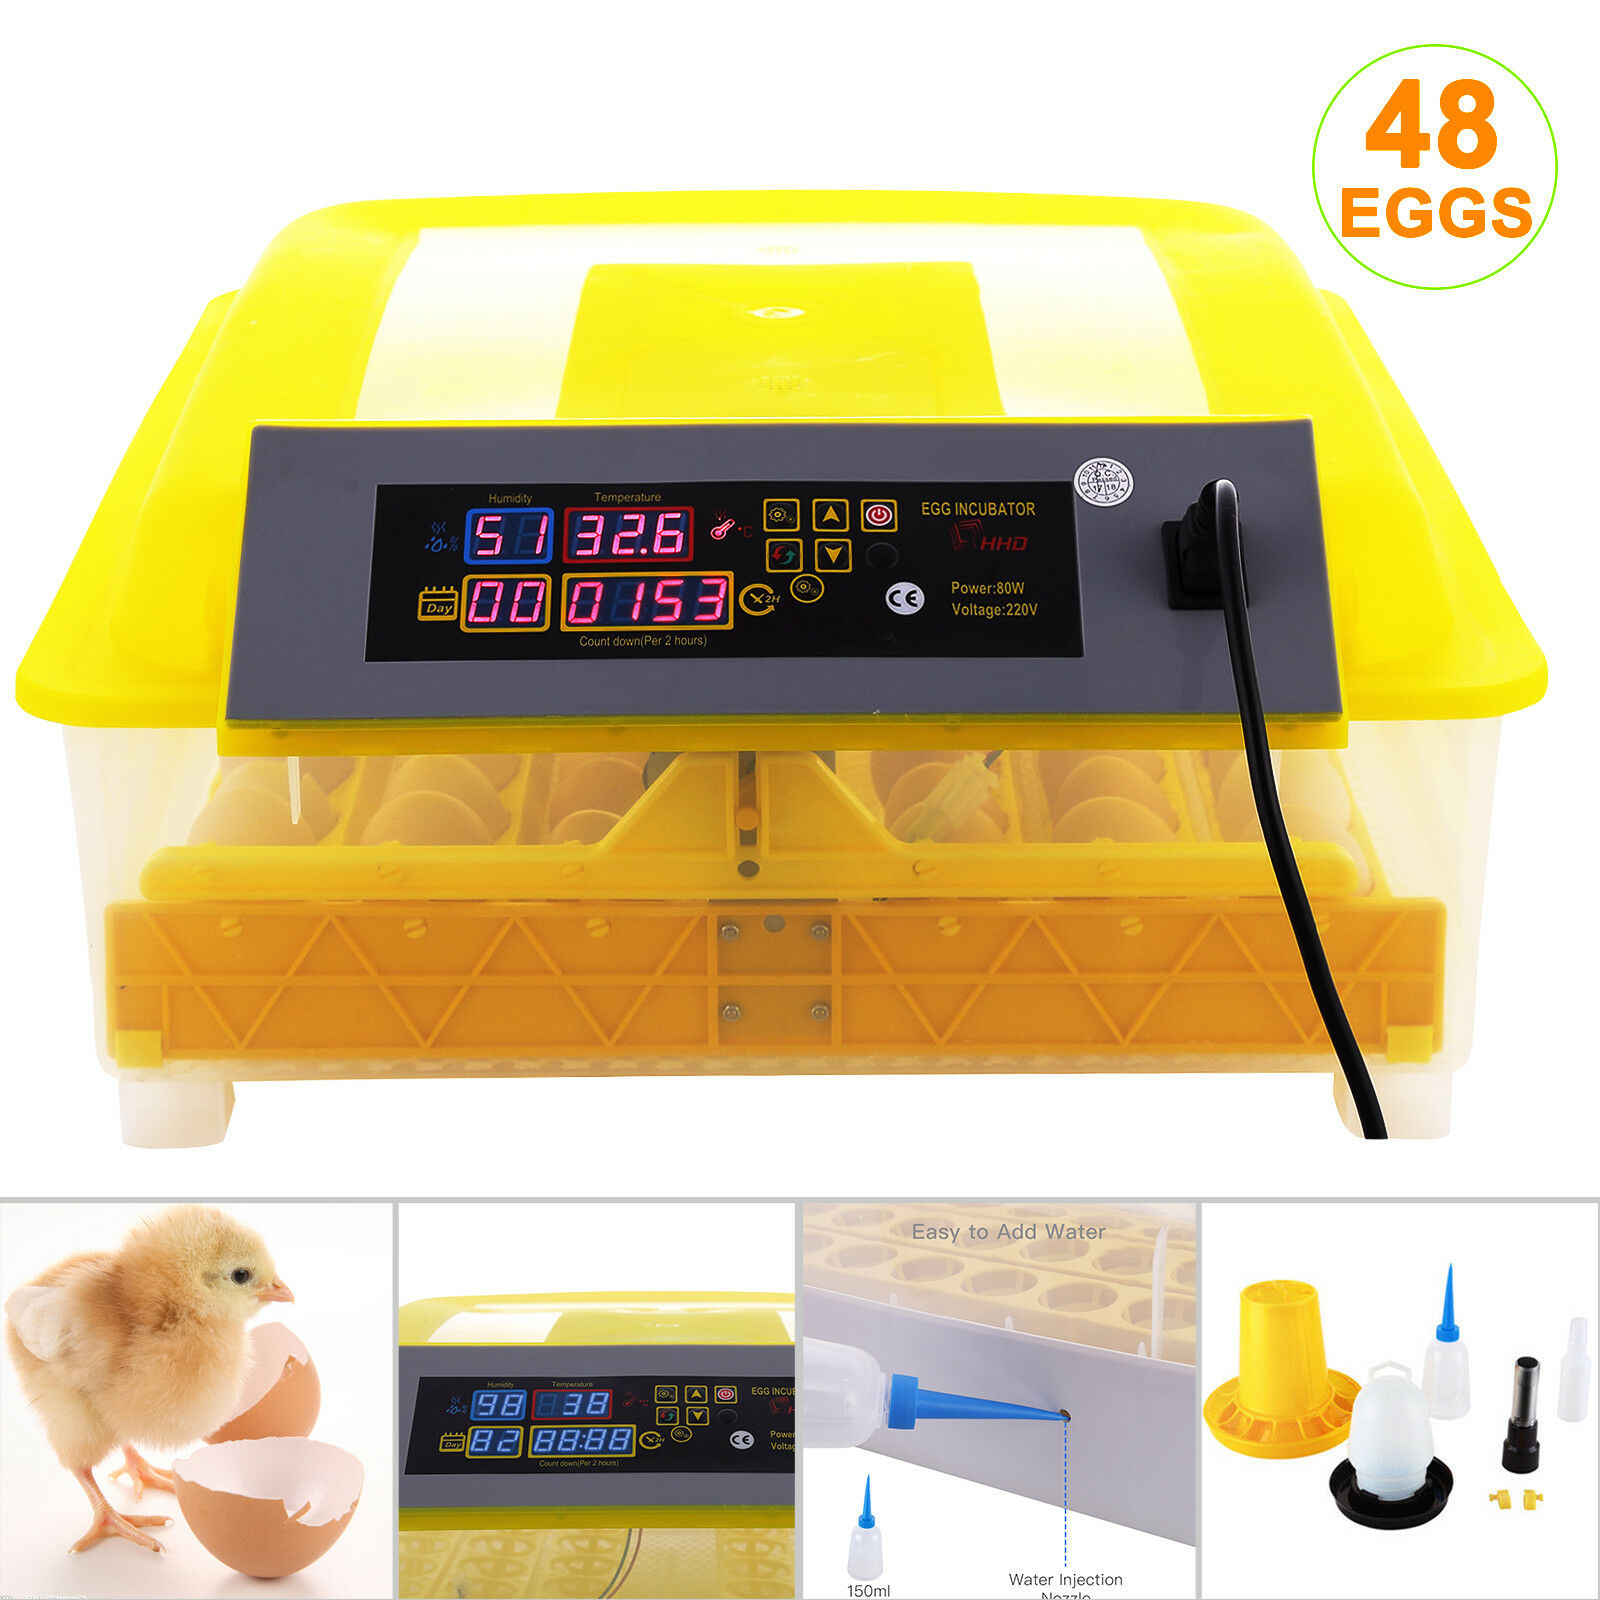 48 Egg 48 Eggs Digital Incubator with Fully Automatic Egg Turning and Humidity Control 80W Clear Hatching for Chicken Duck Eggs OppsDecor Egg Incubator 